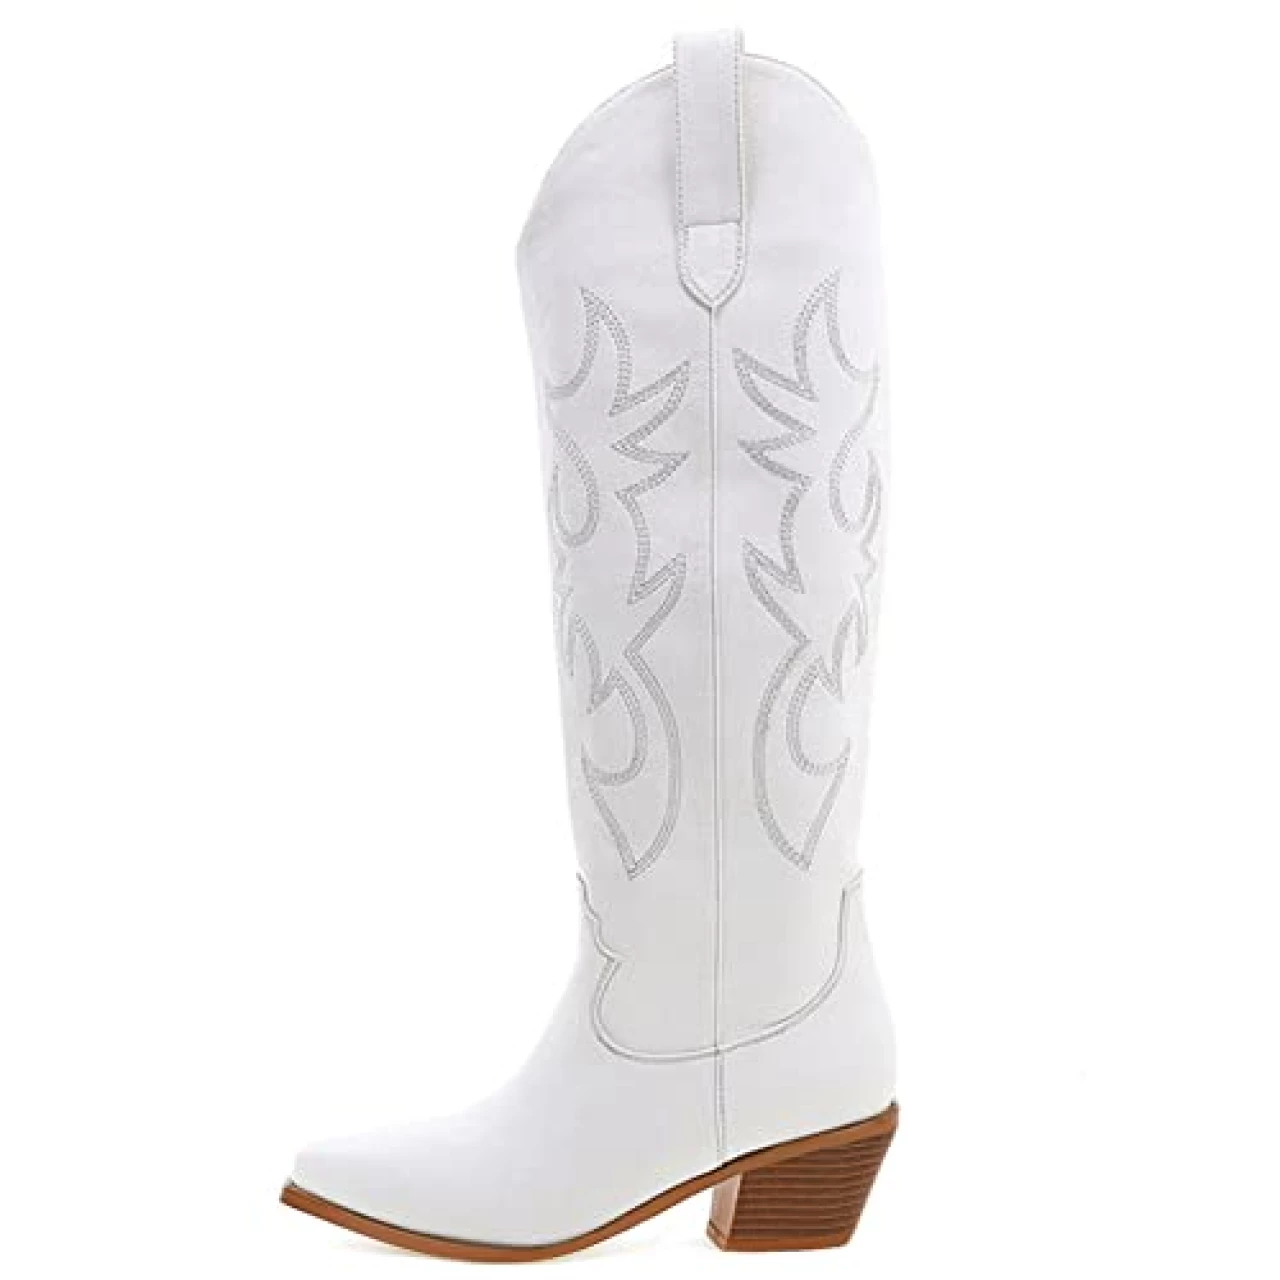 Erocalli Cowboy Boots for Women Embroidered Pull-On Chunky Stacked Heel Cowgirl Knee High Western Boots